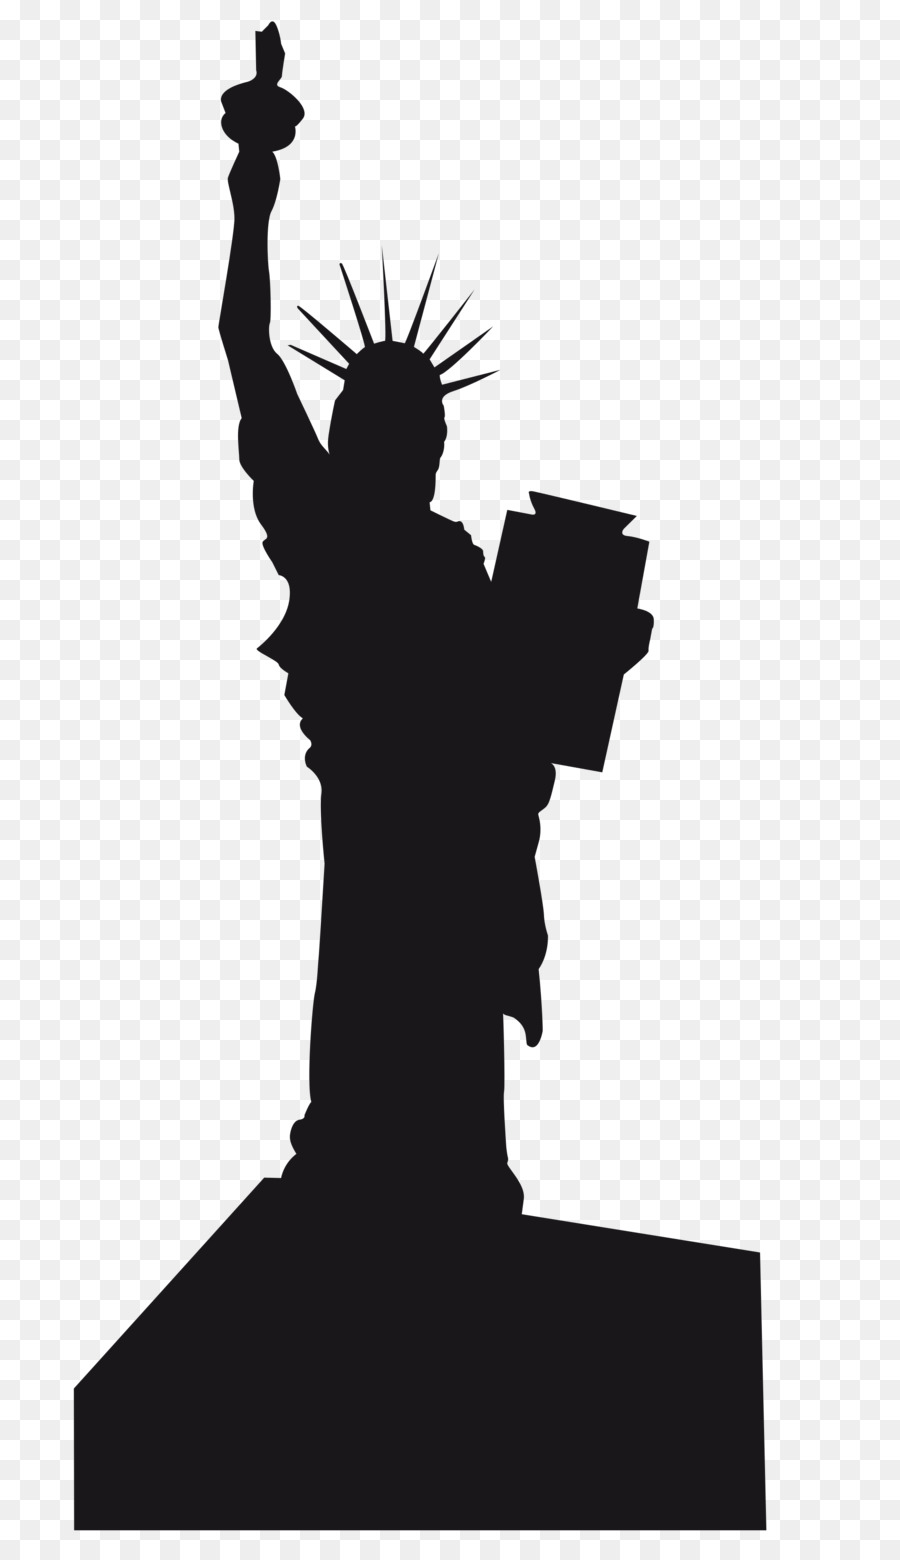 Statue of Liberty Silhouette Scalable Vector Graphics - statue of ...